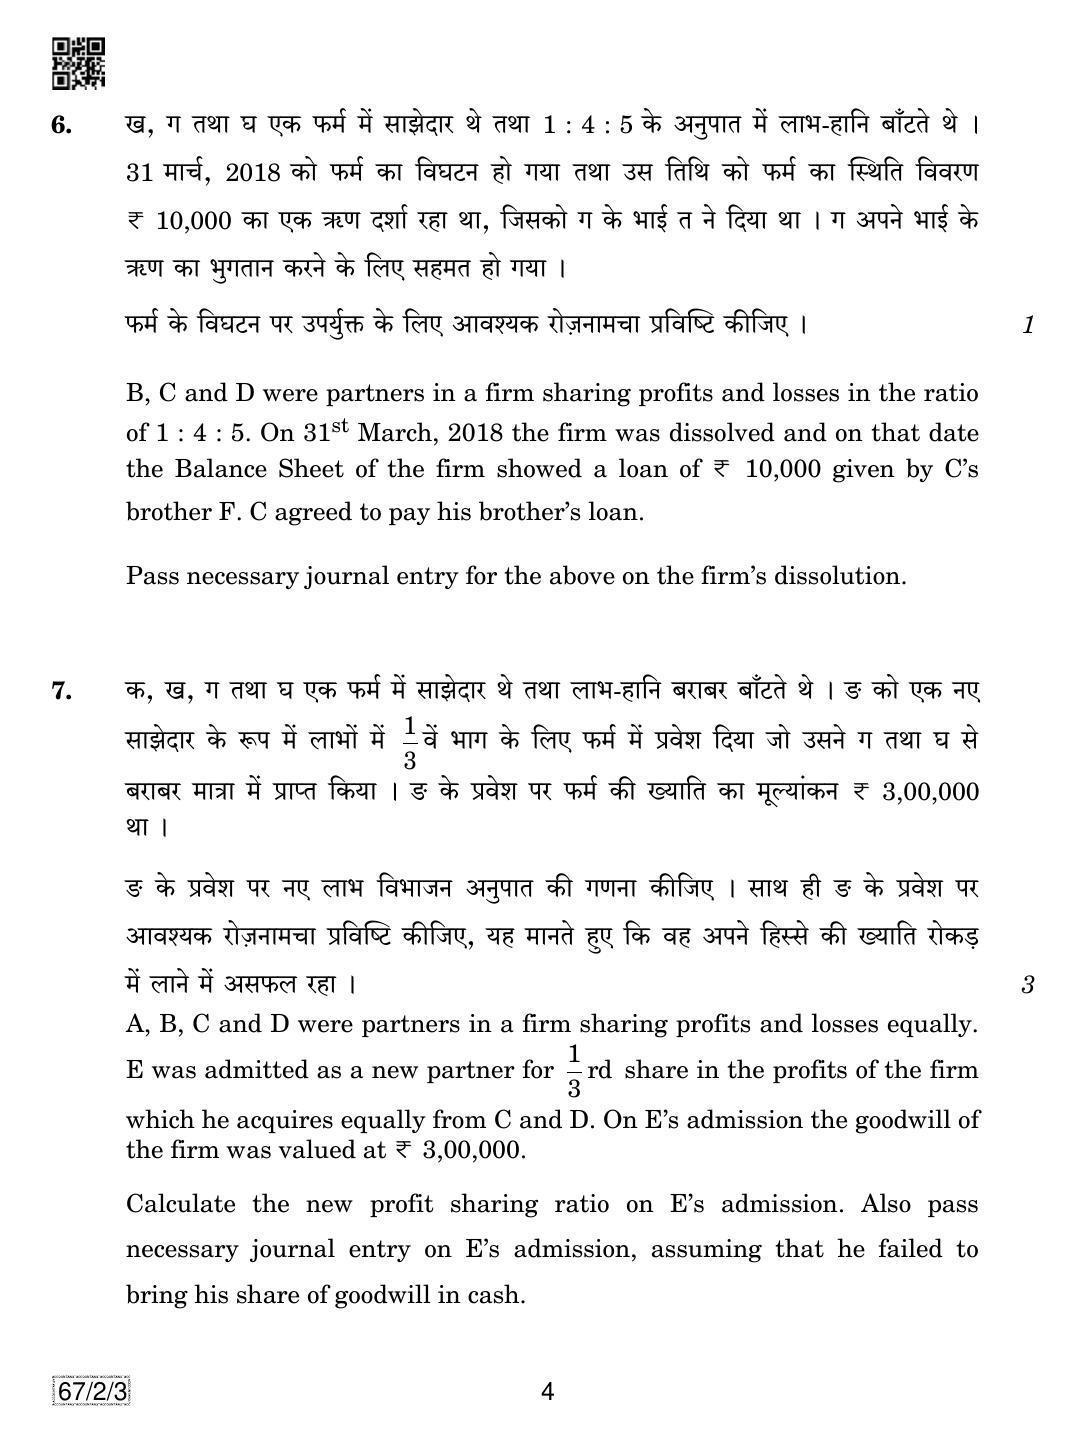 CBSE Class 12 67-2-3 Accountancy 2019 Question Paper - Page 4